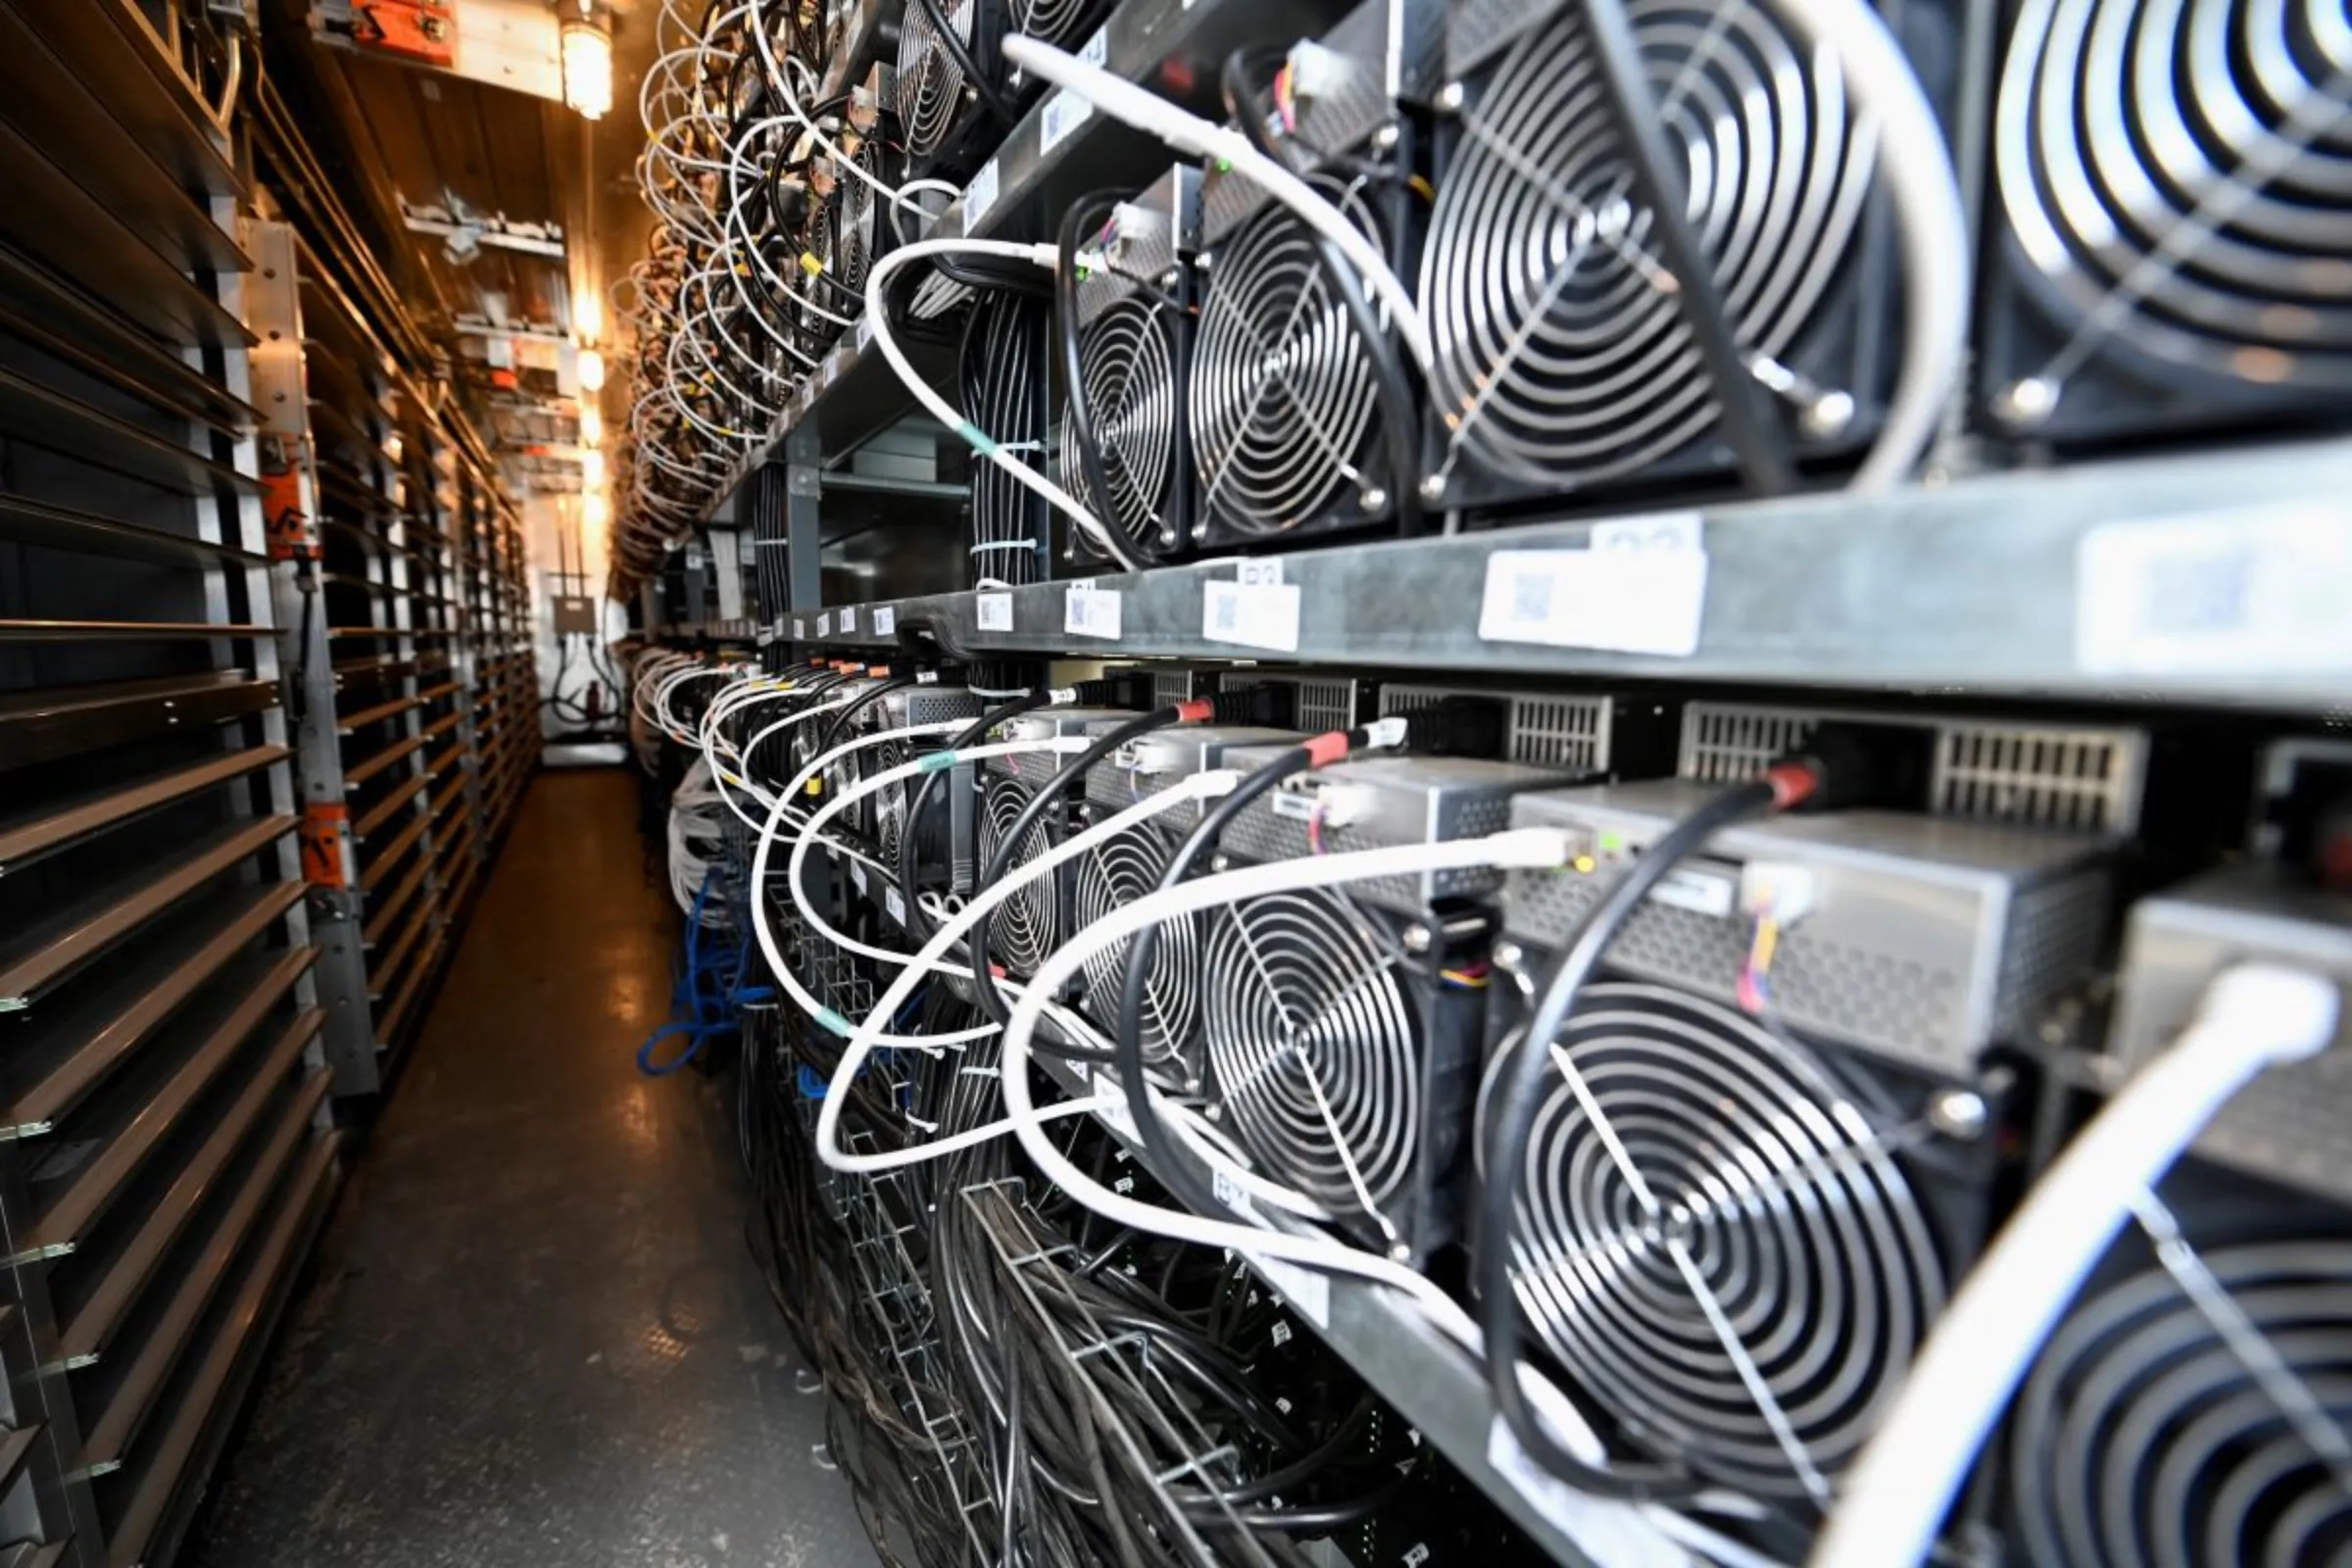 A bank of cryptocurrency miners operates at the Scrubgrass Plant in Kennerdale, Pennsylvania, U.S., March 8, 2022. REUTERS/Alan Freed